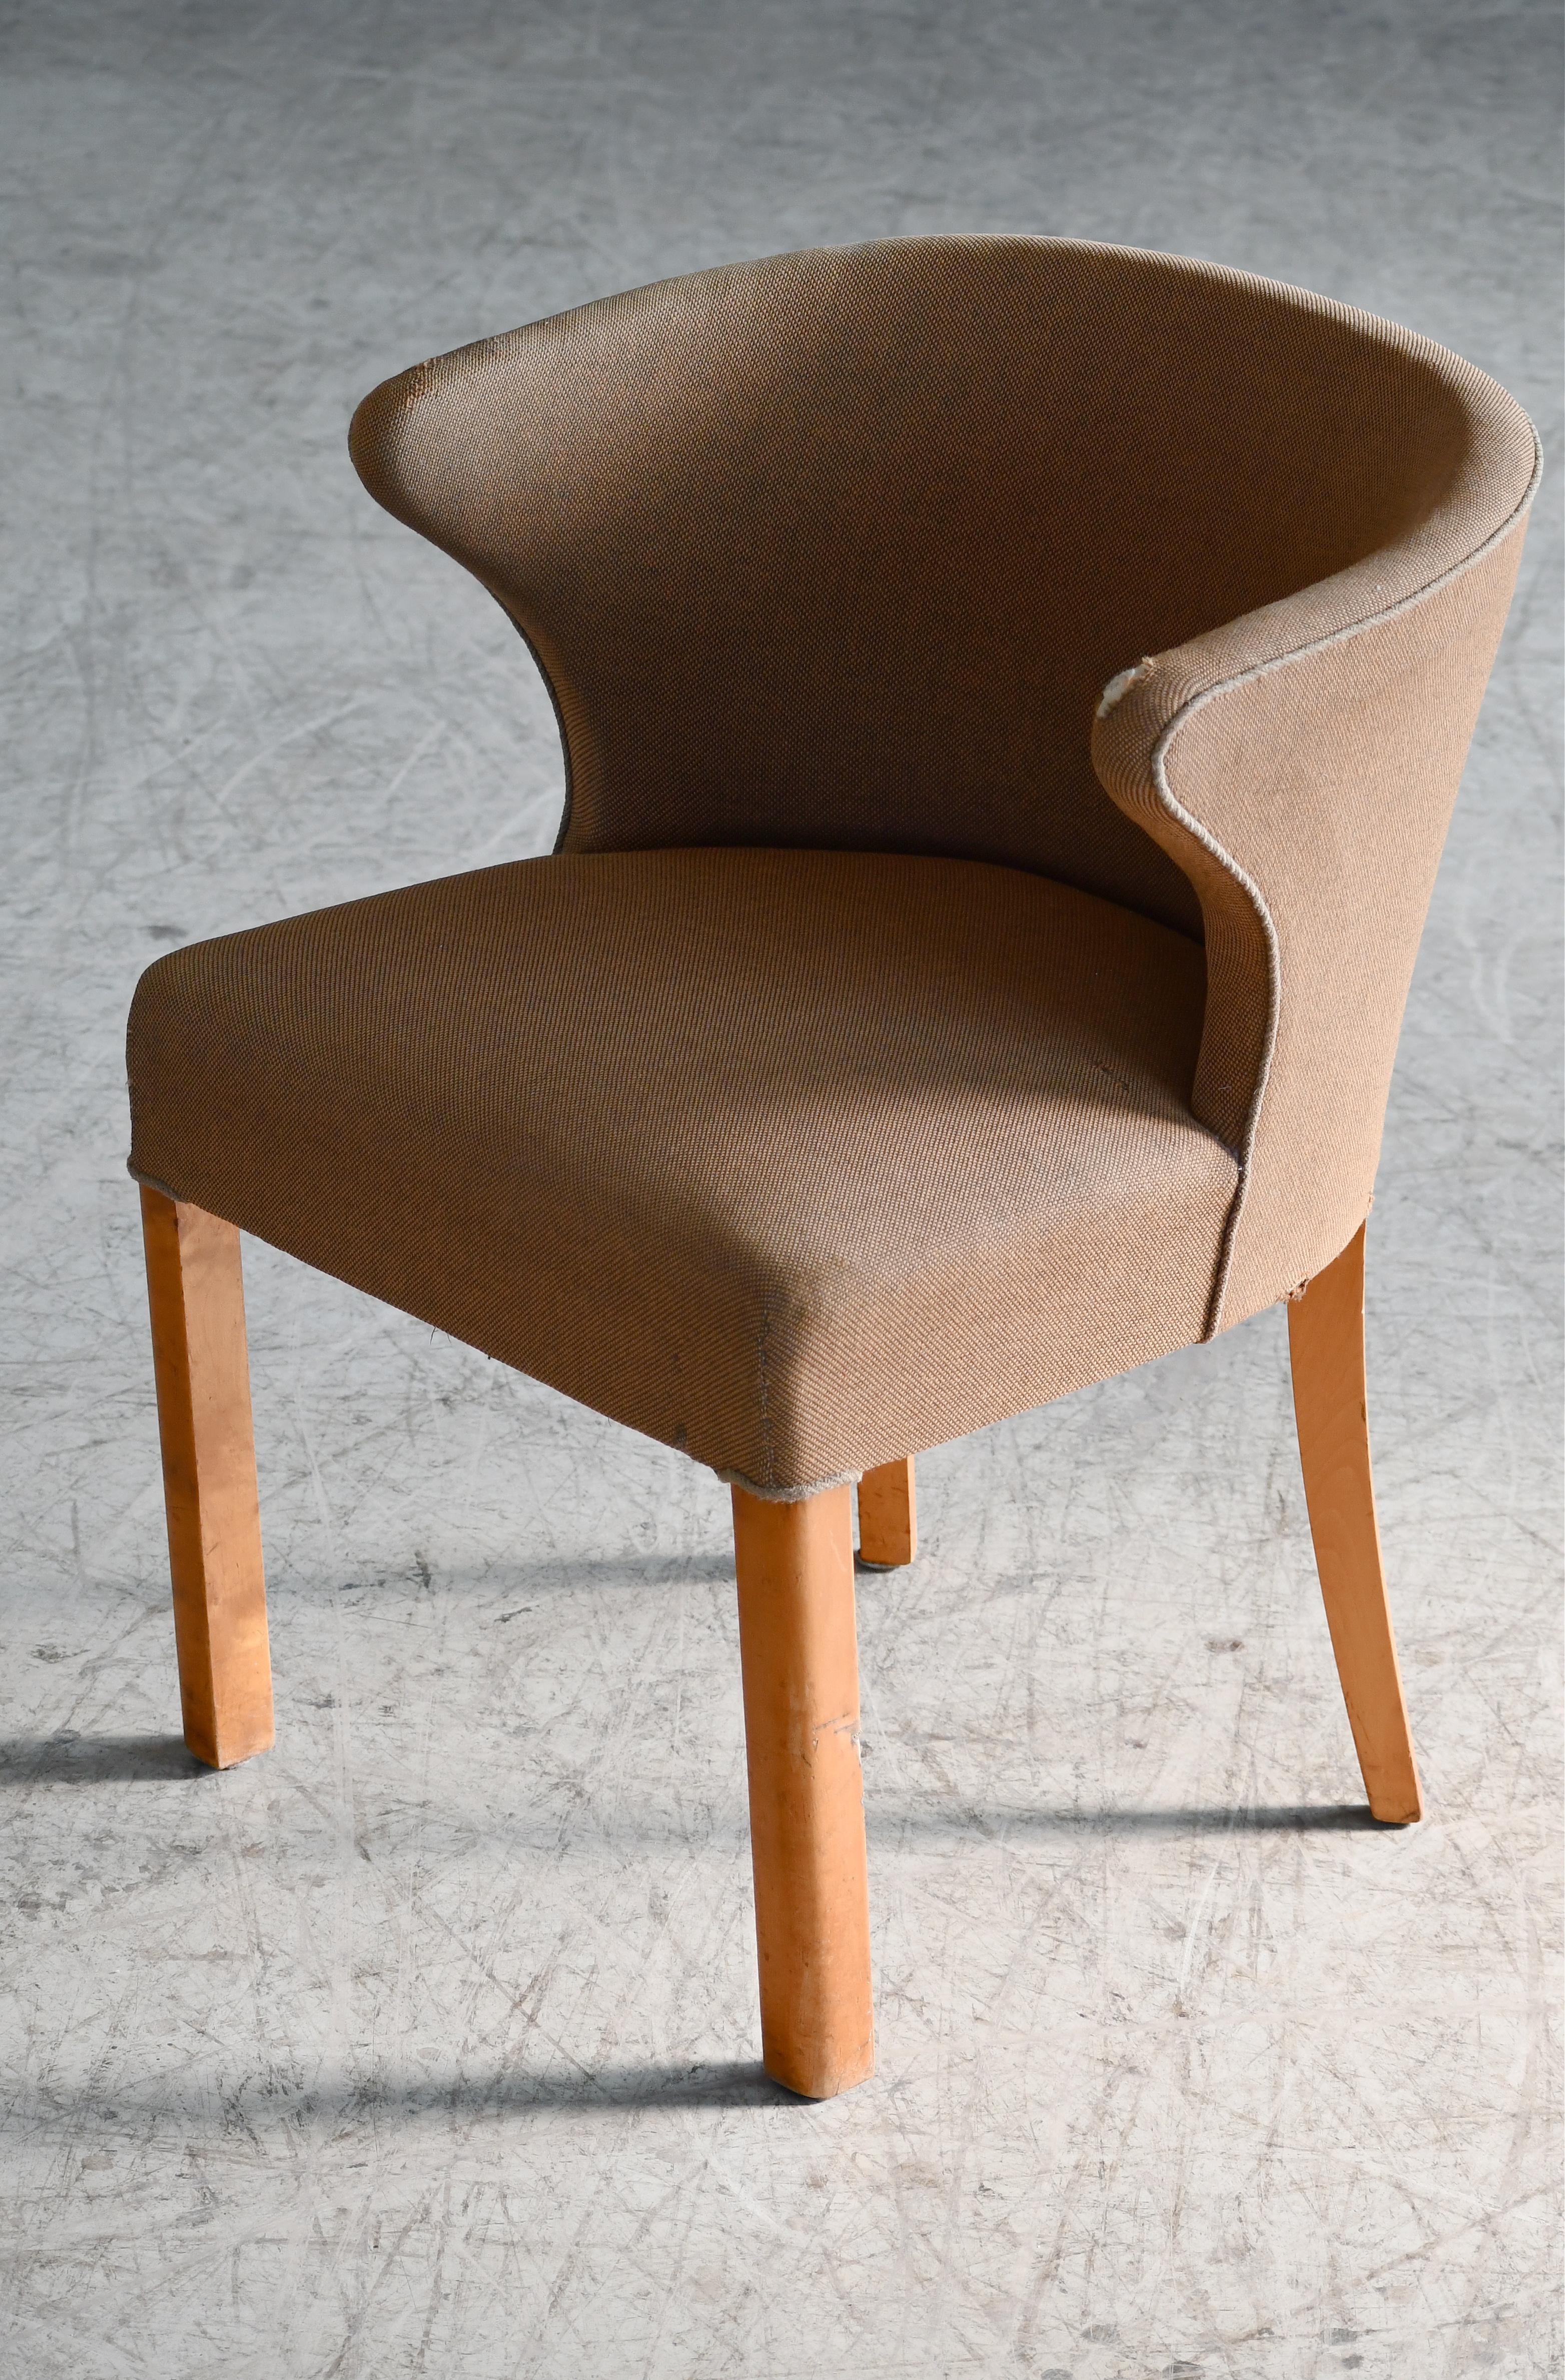 Great little accent chair. Solid and sturdy. We love the design with the high seat height and low backrest. Very charming, elegant and versatile with legs in natural maple. Overall very good condition. We can reupholster at a very competitive